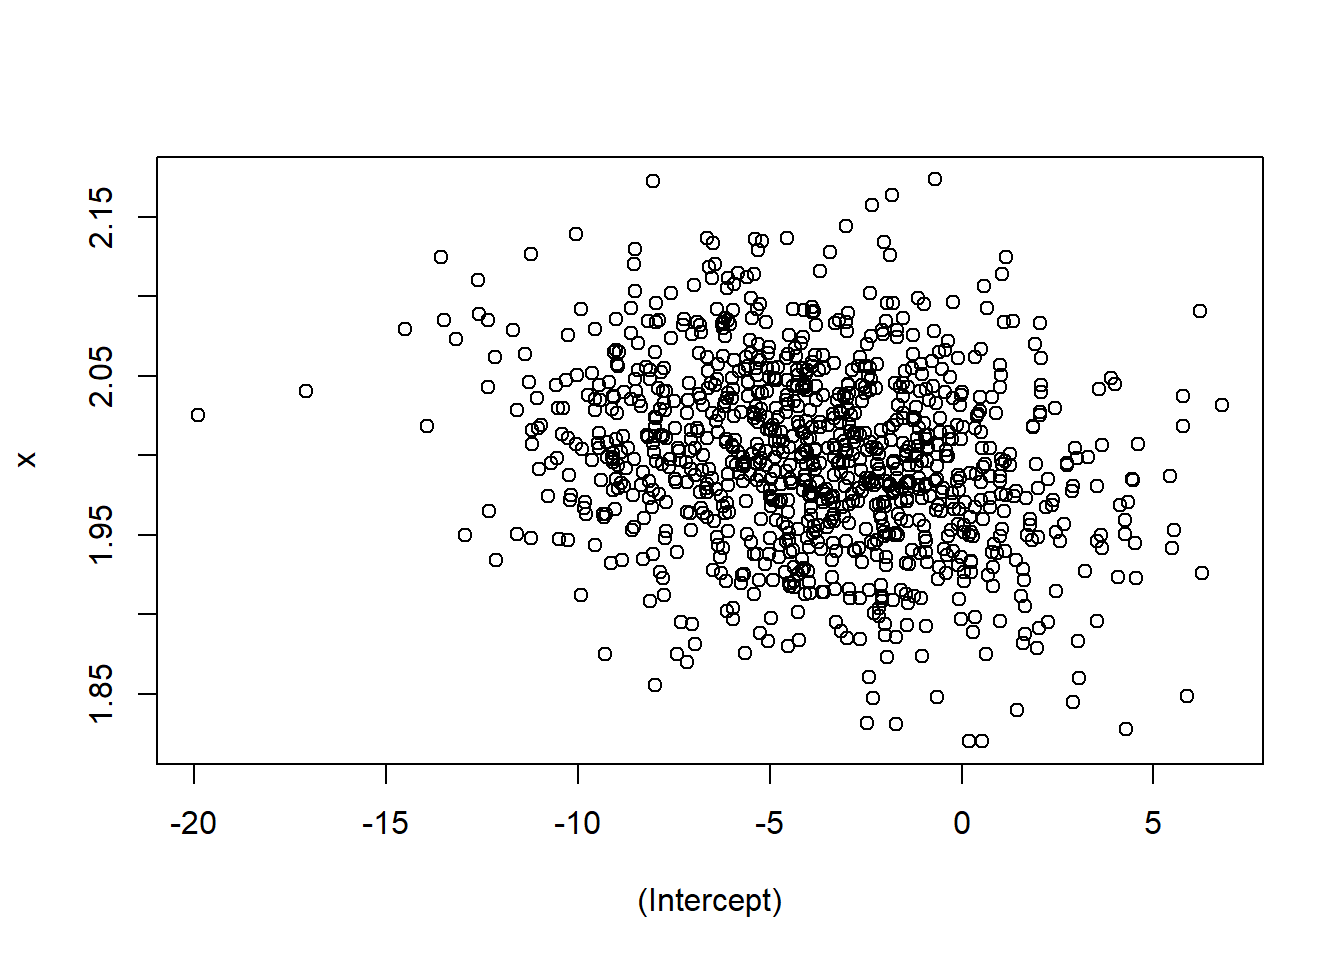 Scatterplot of fixed effect coefficients from 1000 models fitted to simulated data.